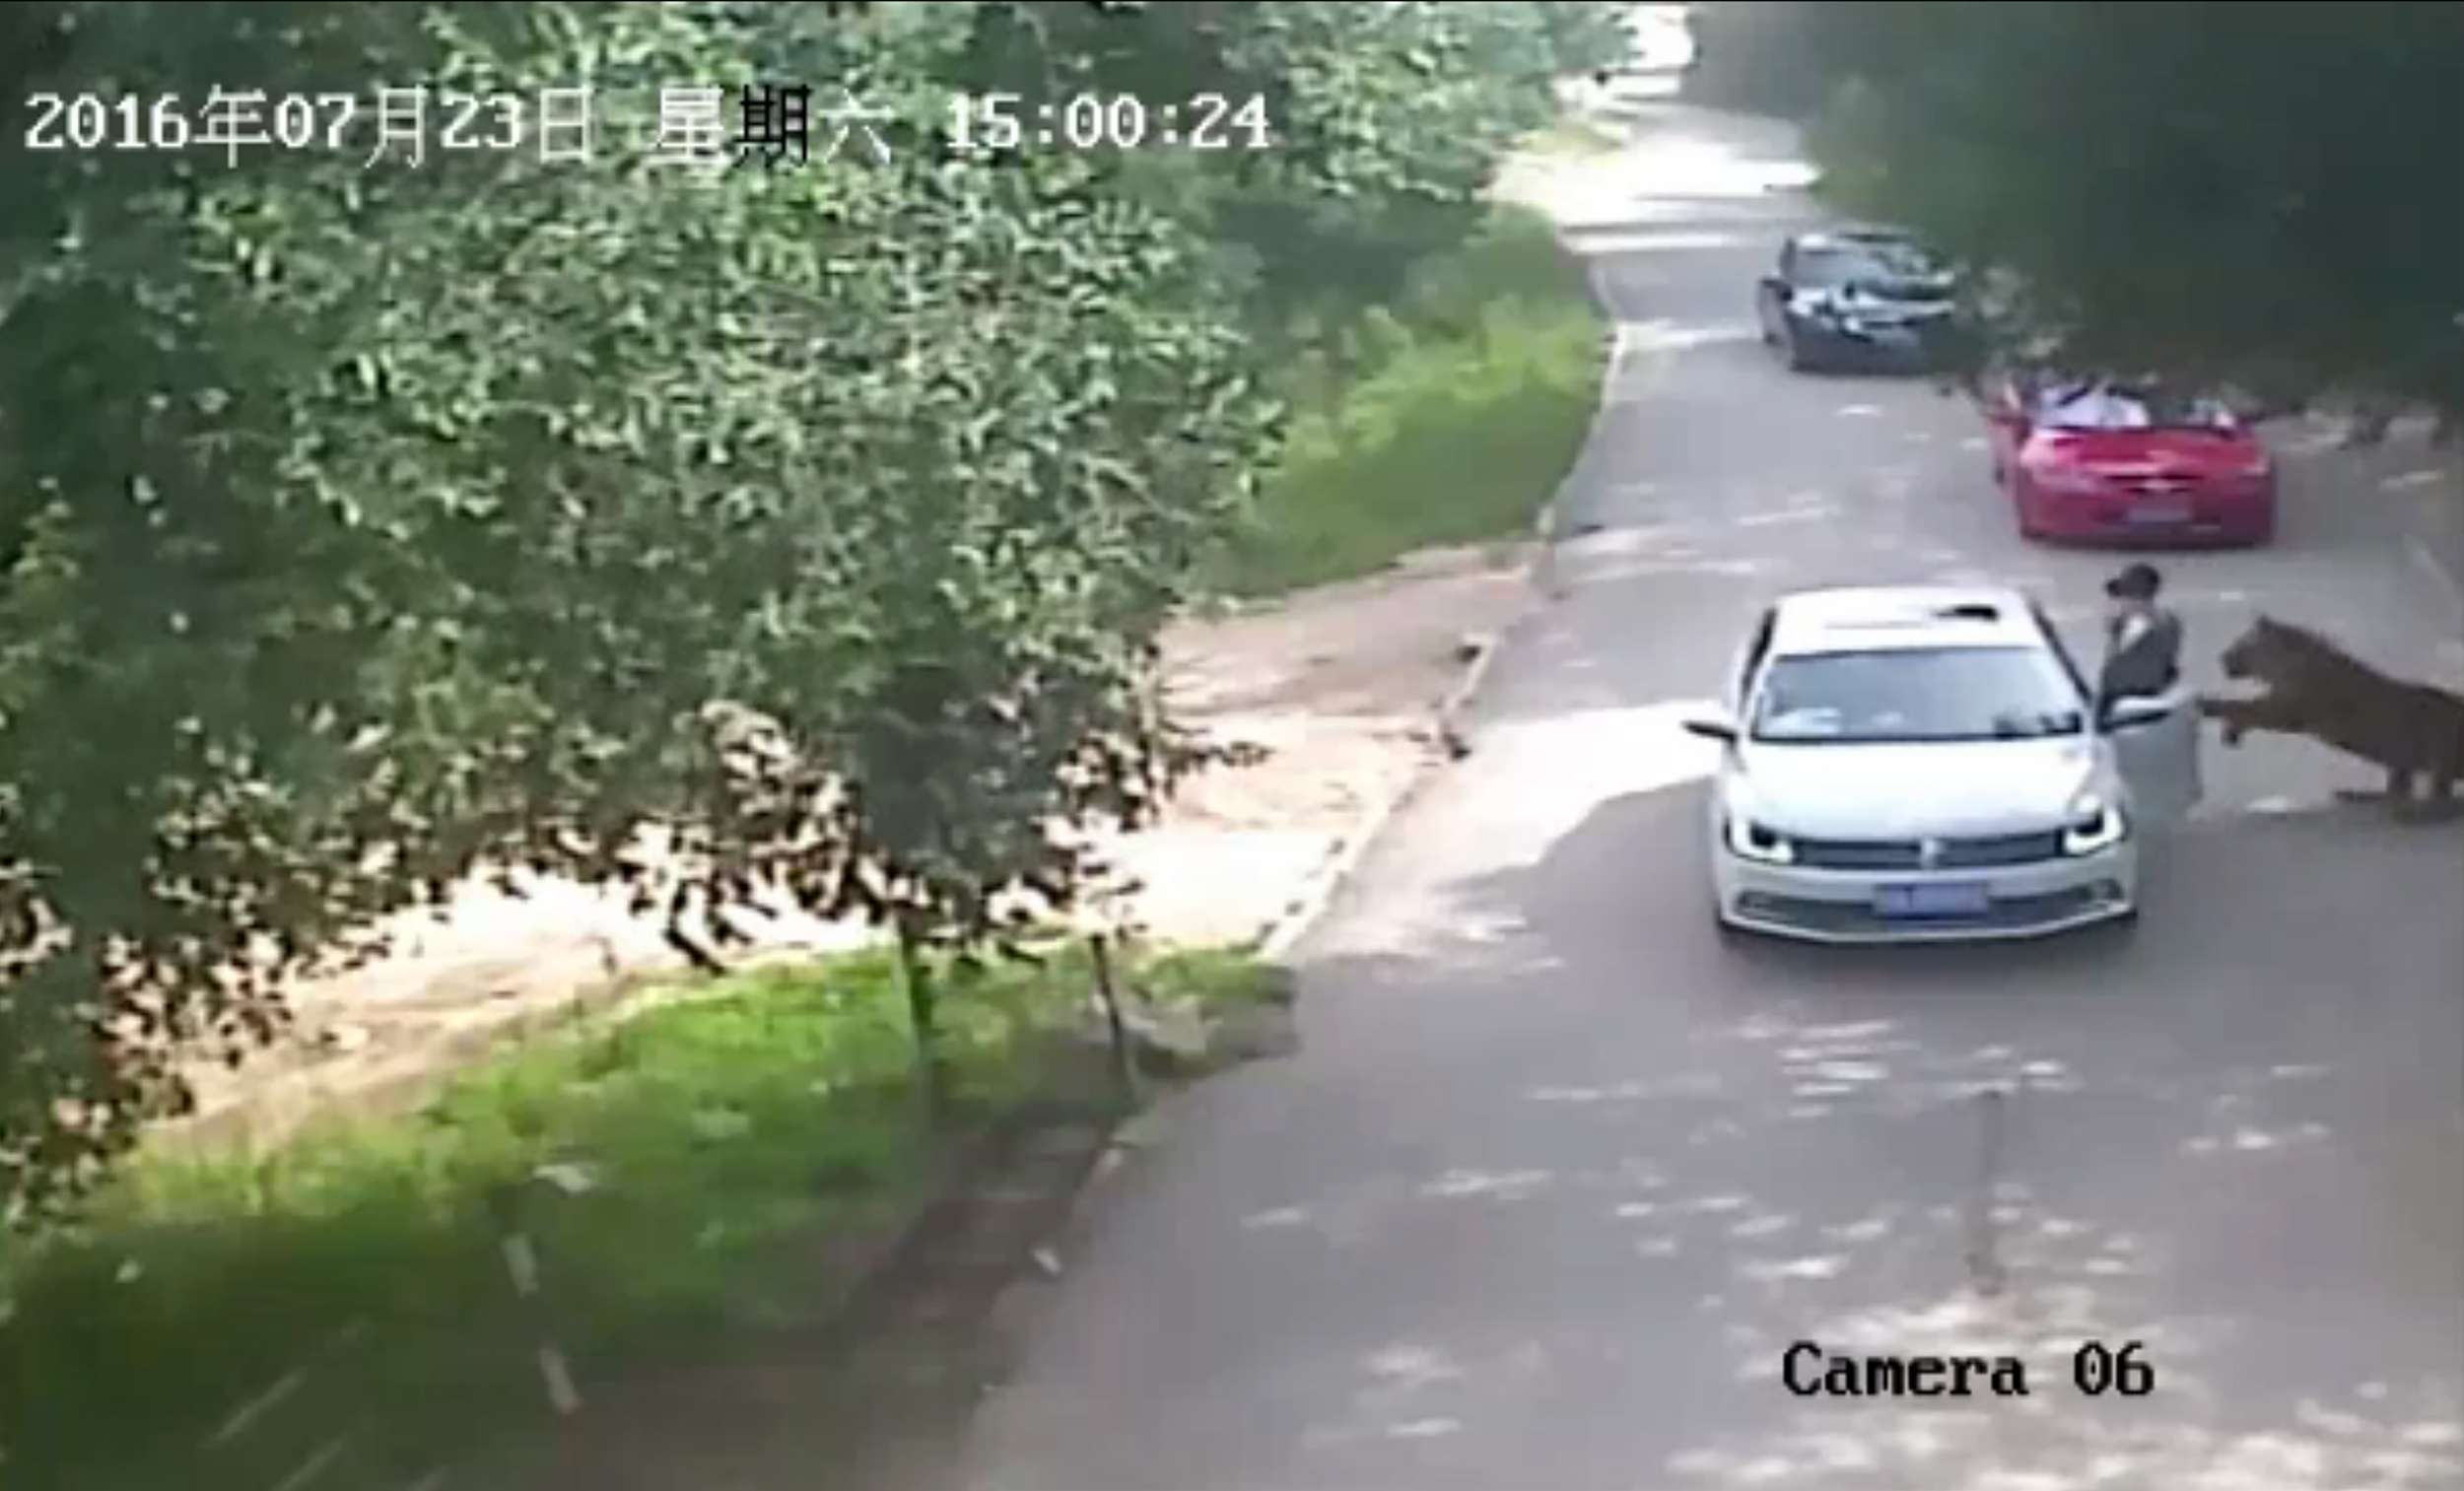 Security footage shows a woman who had left her car at Badaling Wildlife World on July 23, seconds before she was dragged away by a tiger. Photo: AFP